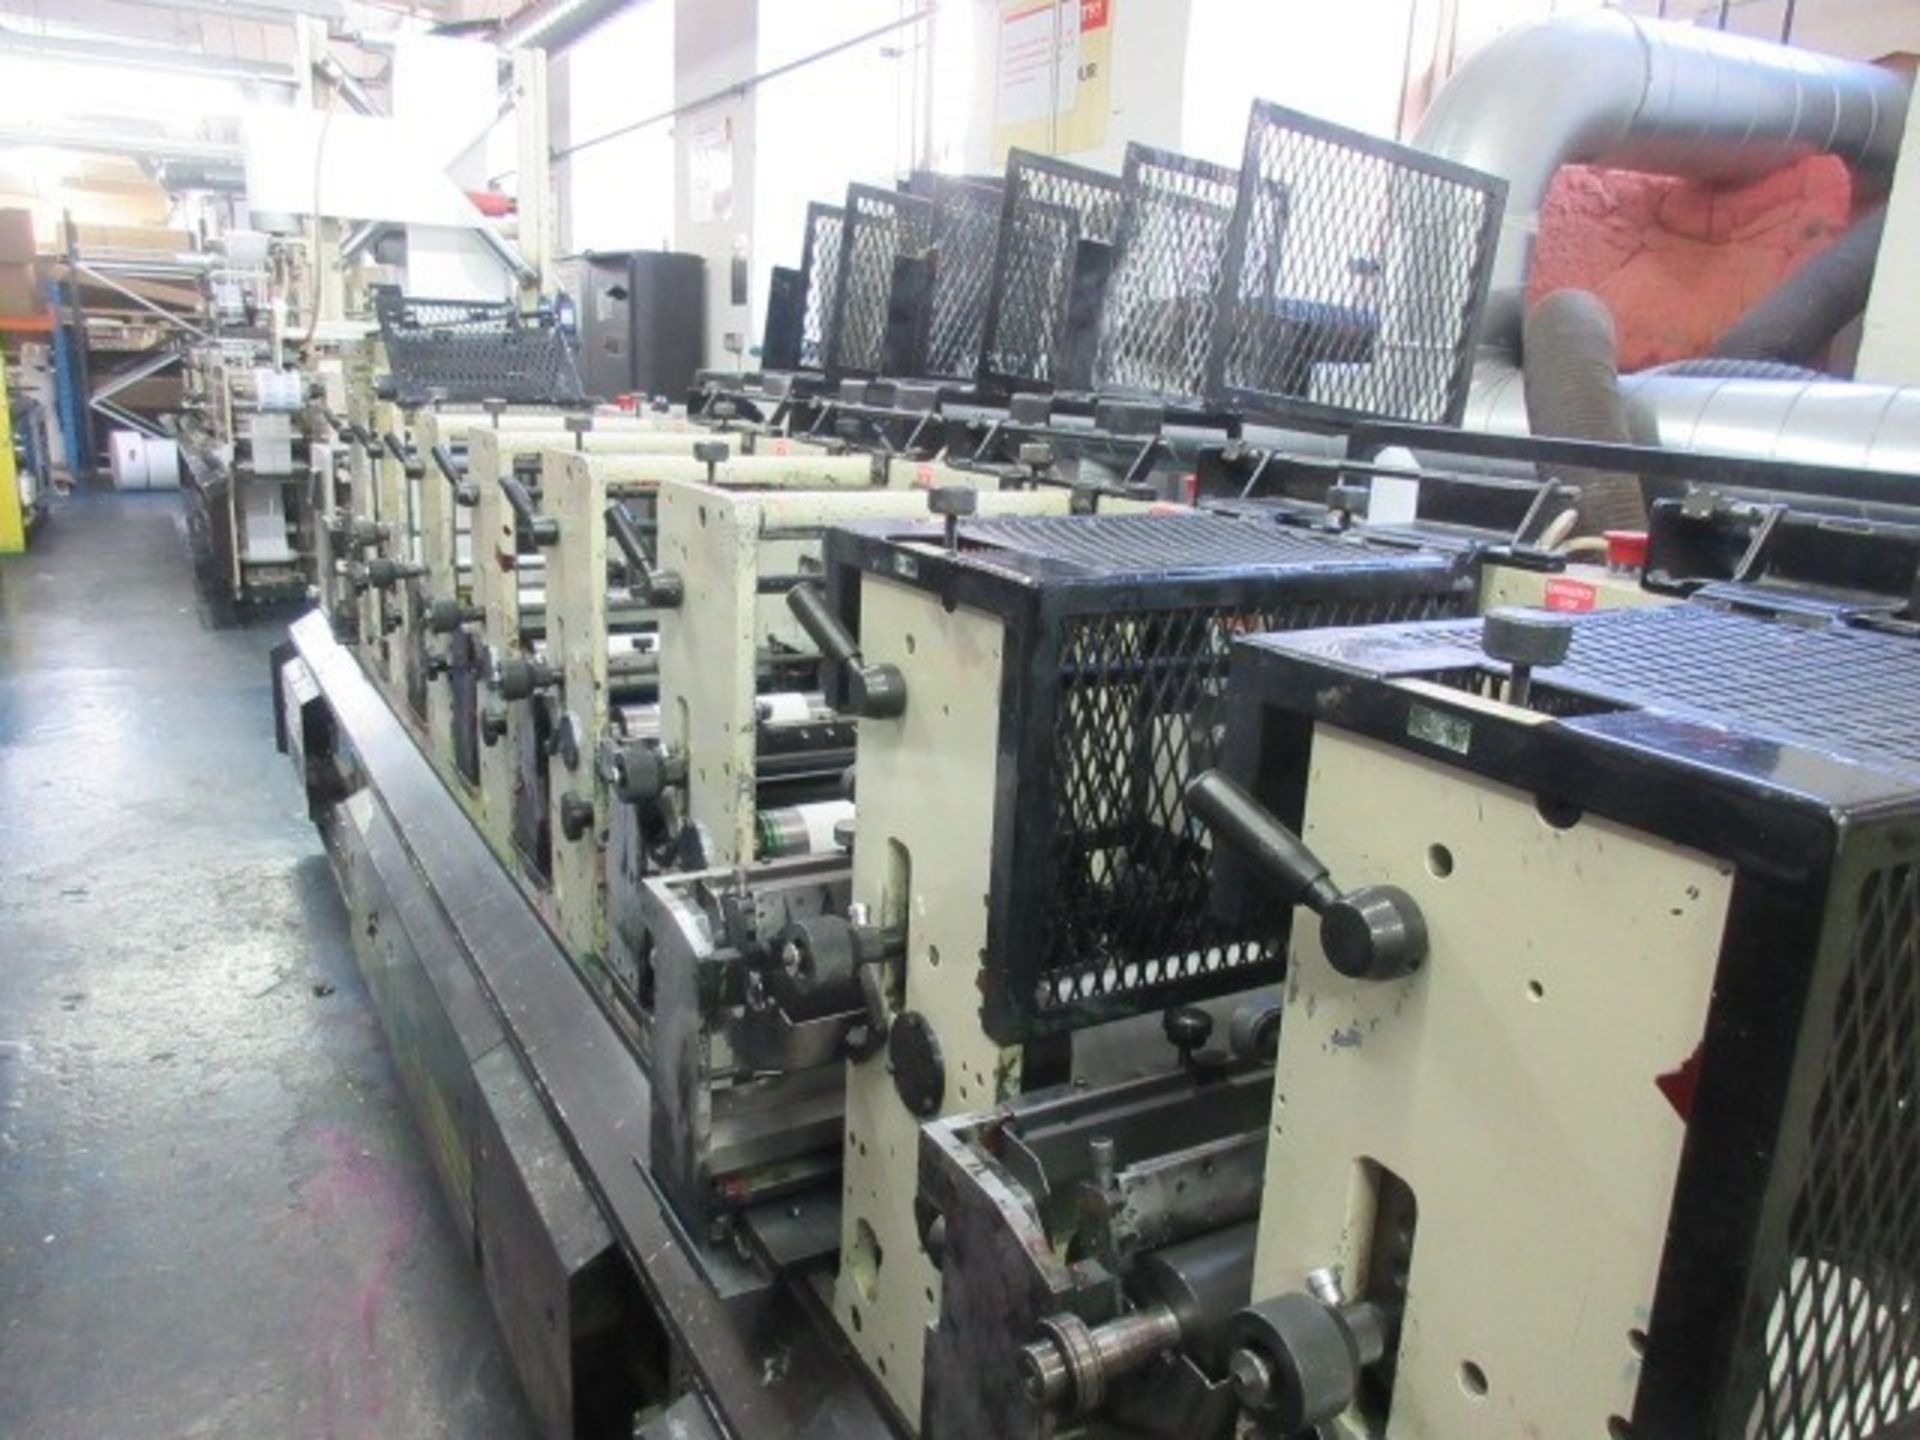 Mark Andy 2200-10F 10” 8 colour flexographic label printing press. Serial no: 1260086 (2002) - Image 138 of 383